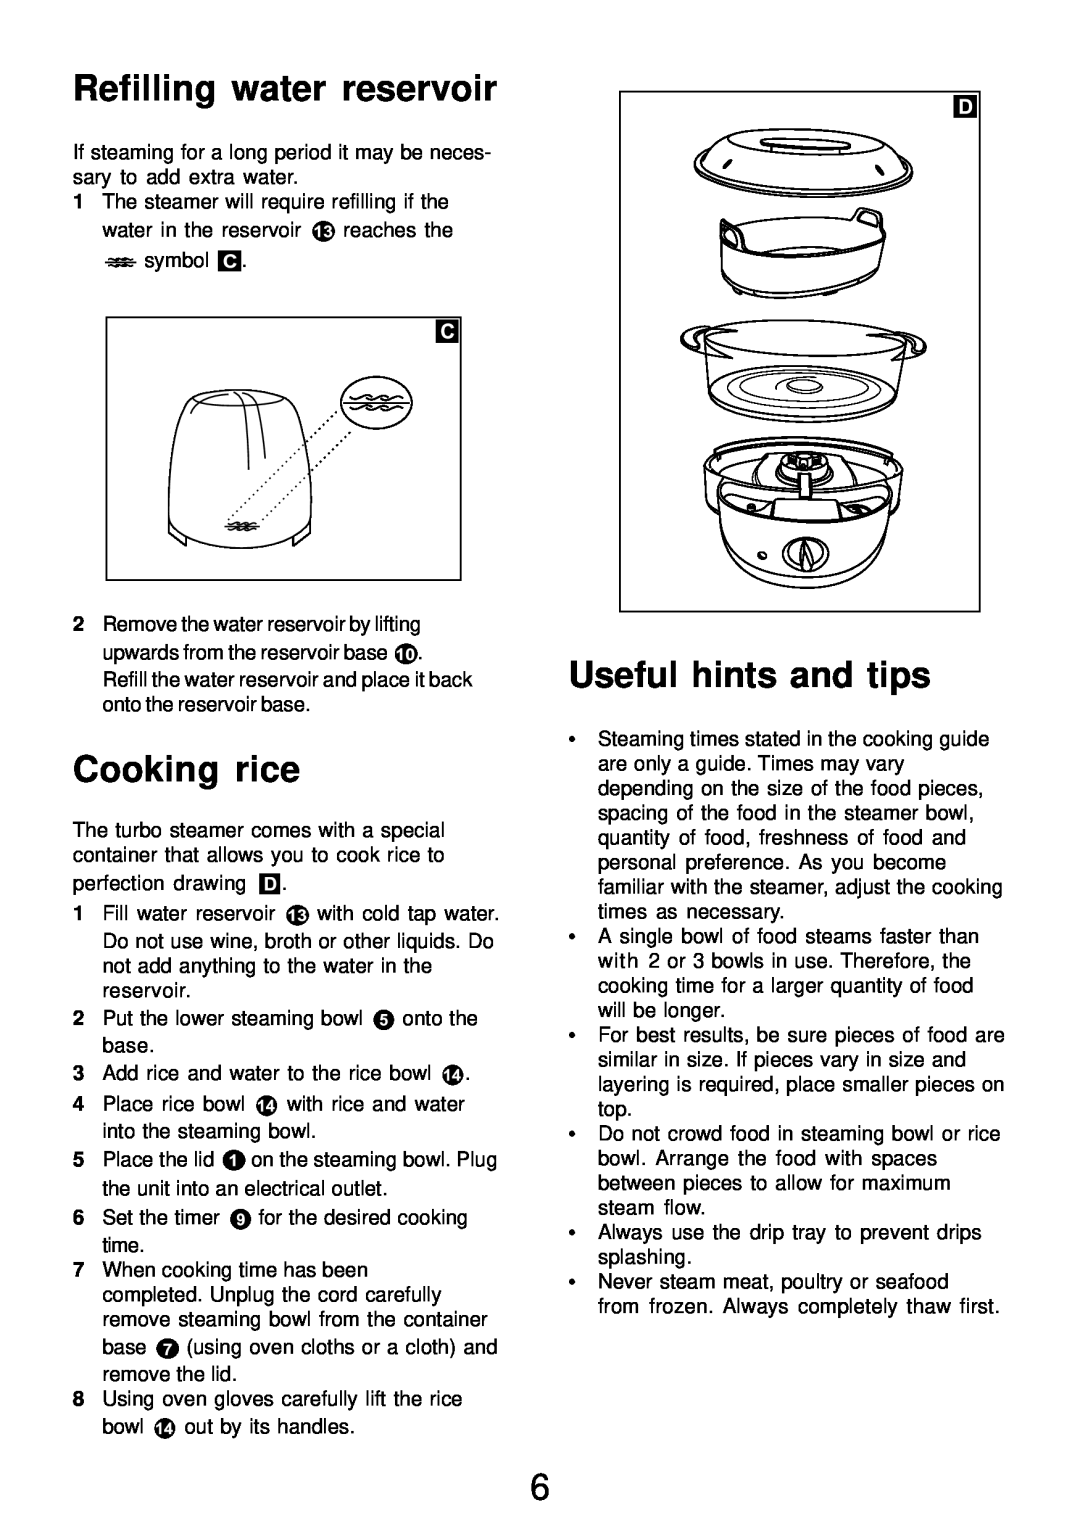 Morphy Richards Electric Steamer manual Refilling water reservoir, Cooking rice, Useful hints and tips 